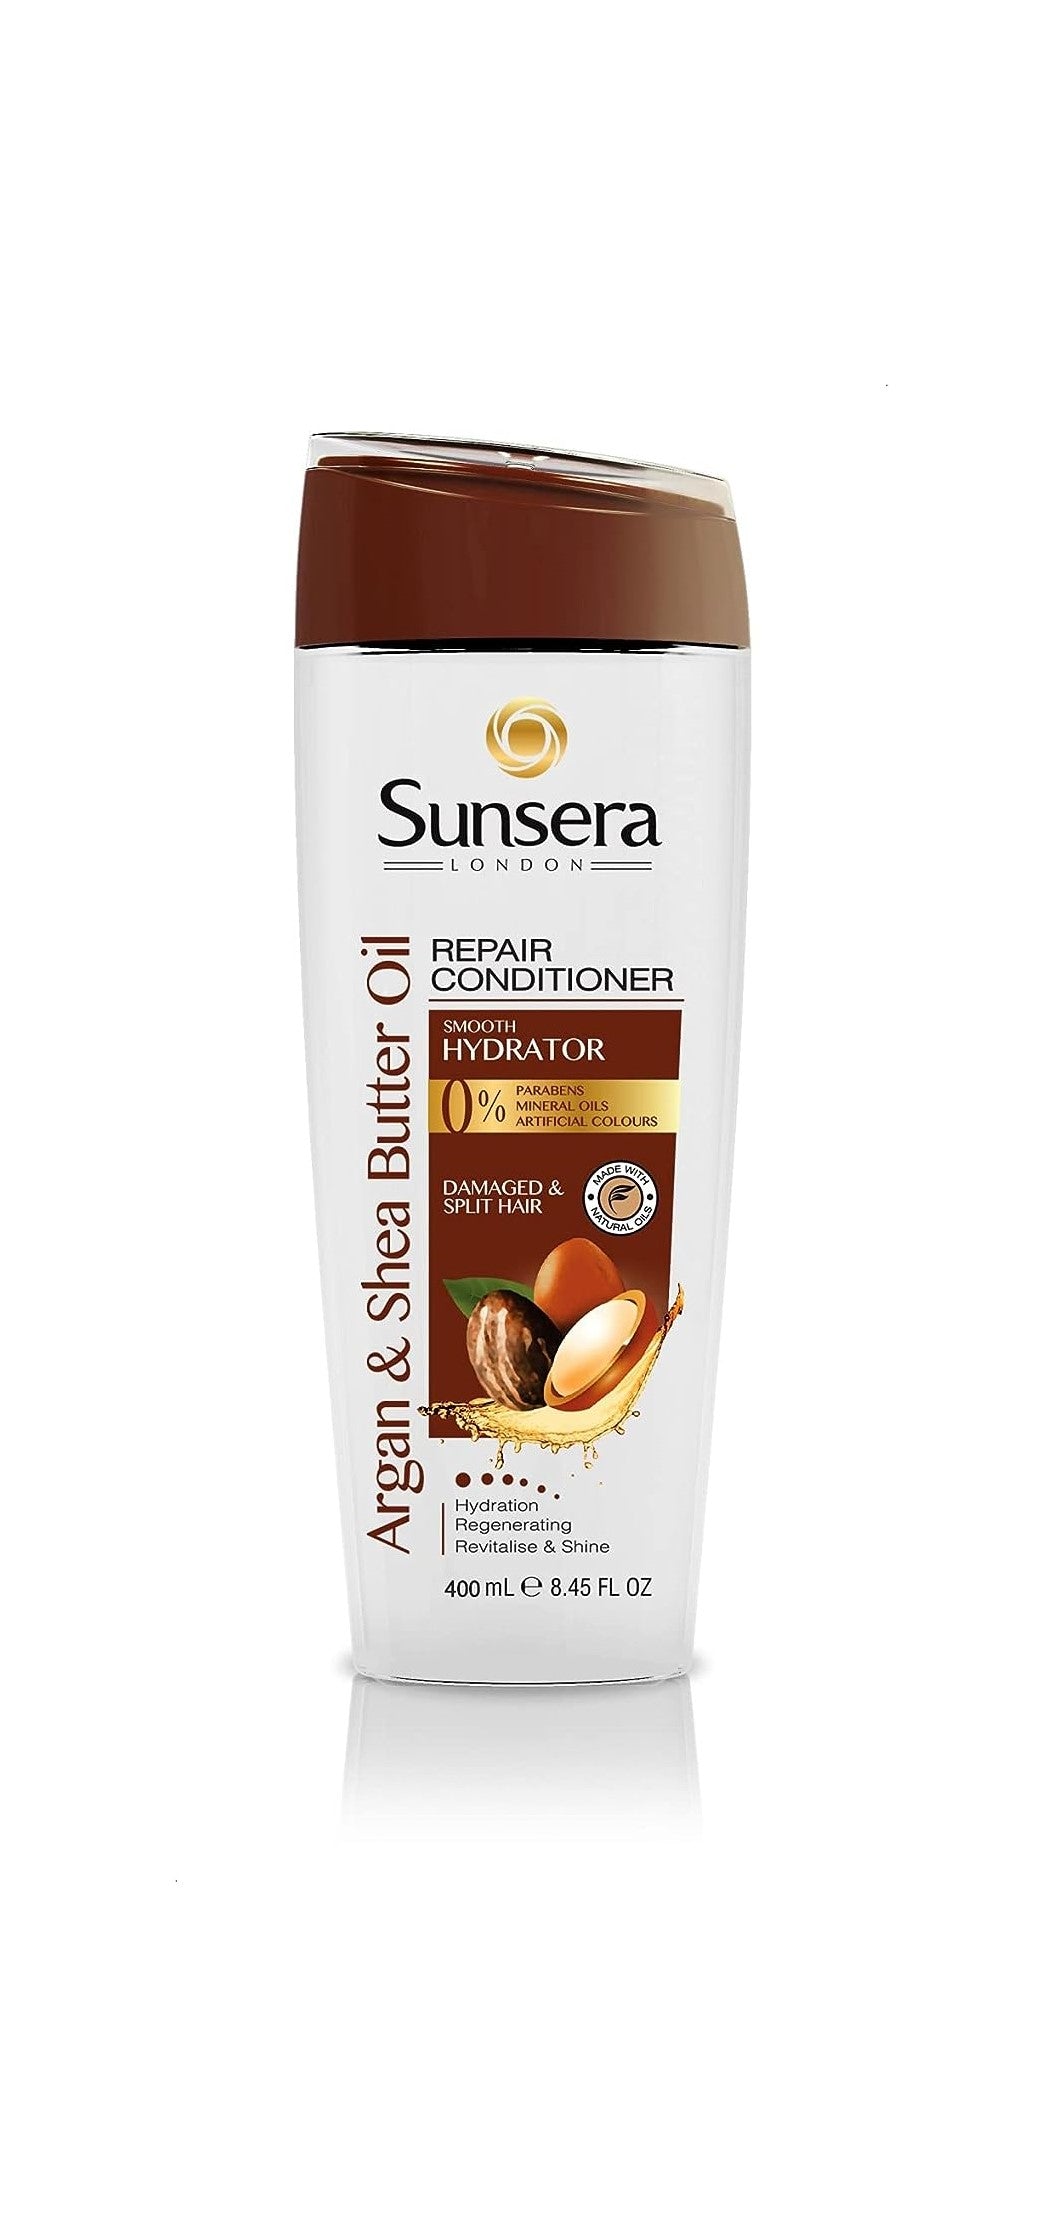 Sunsera Repair Conditioner with Argan & Shea Butter Oil - 400ml